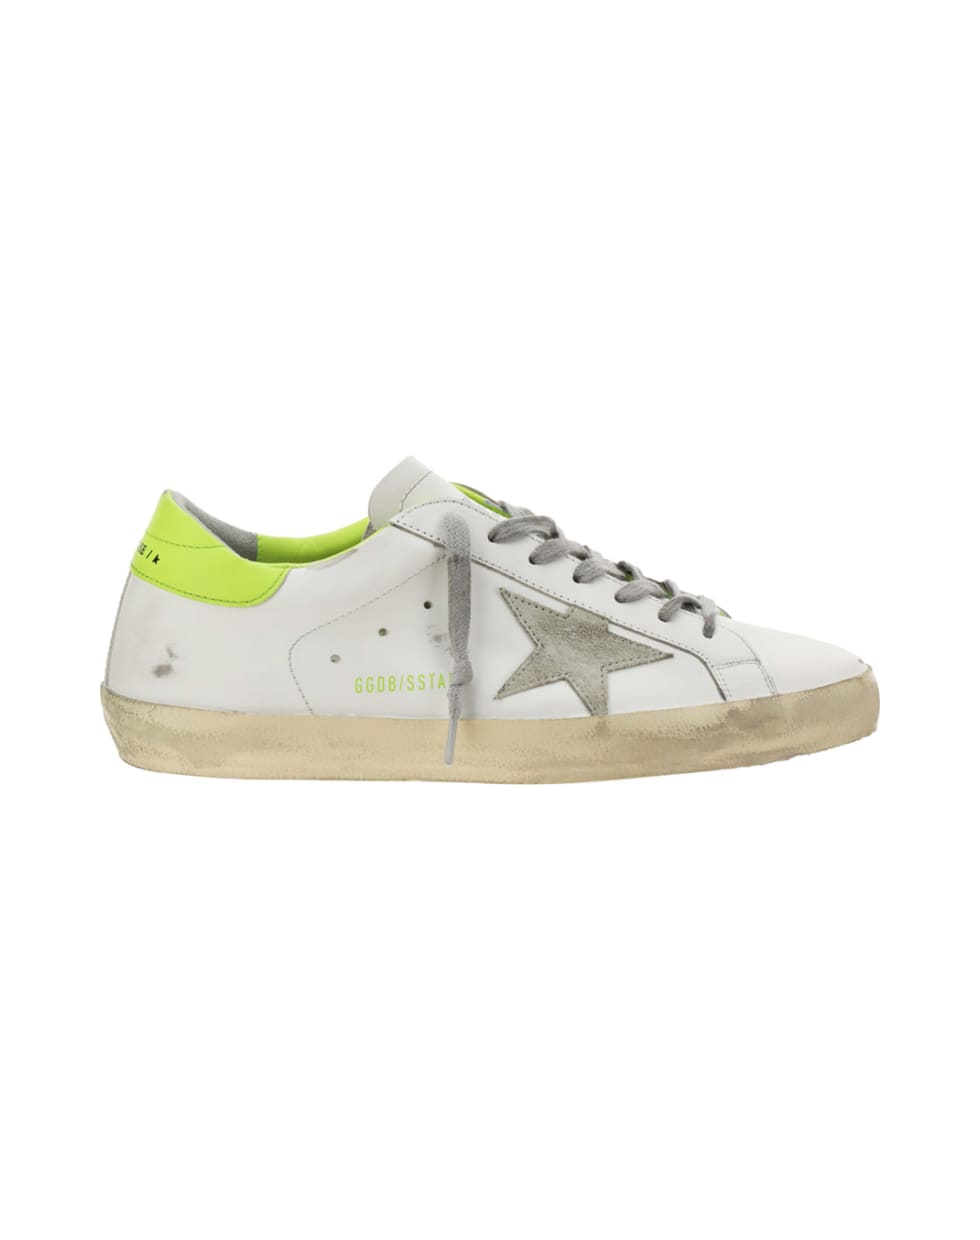 Golden Goose Sneakers - White/ice/lime green